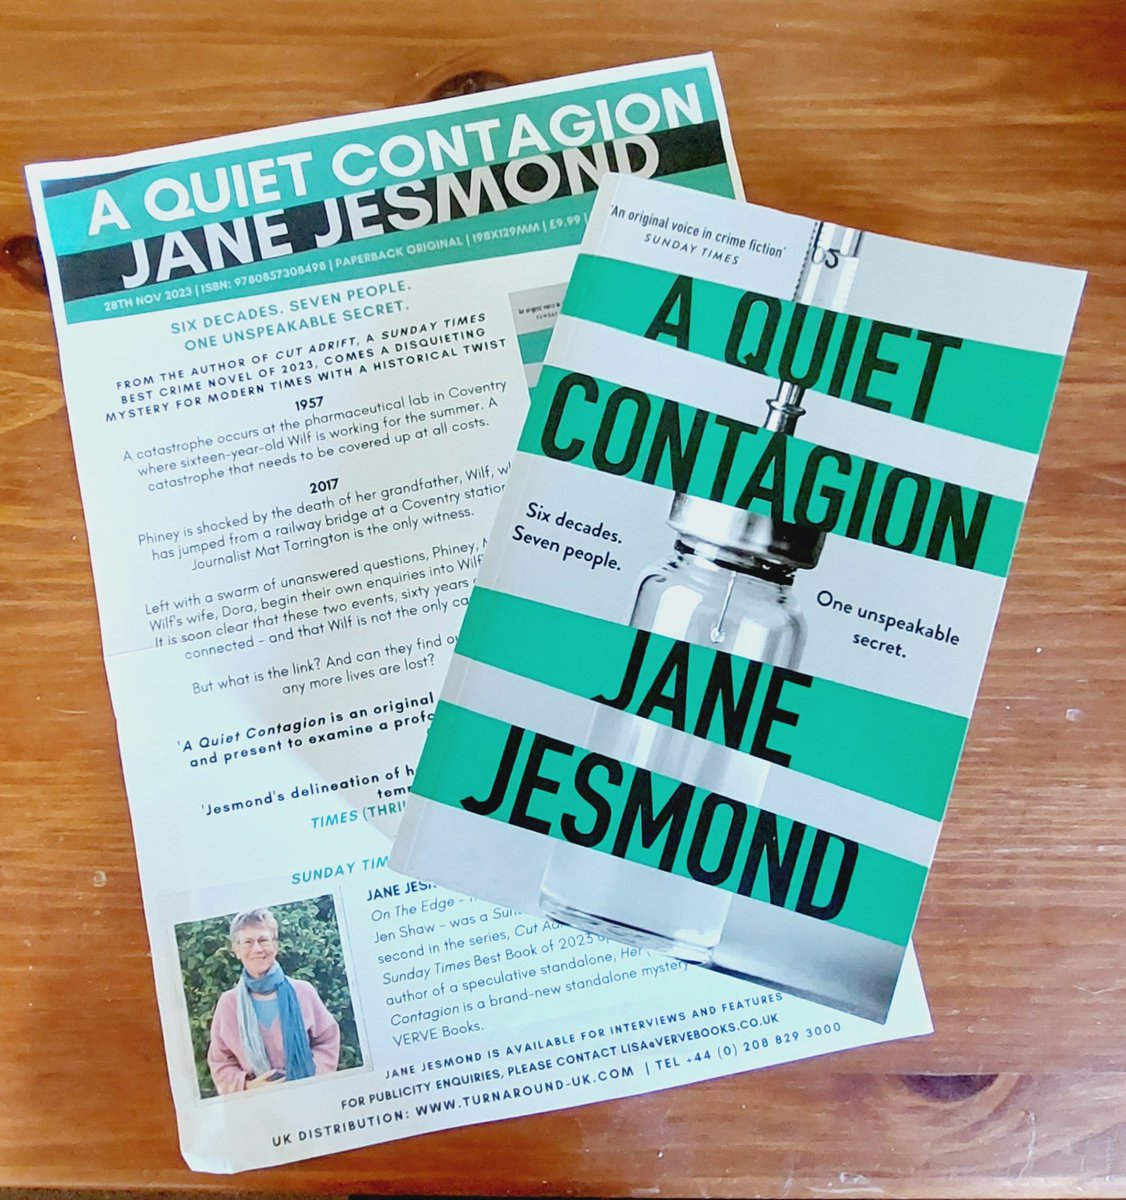 More fabulous #bookmail from @VERVE_Books (fast becoming a favourite publisher of mine). Thank you so much for my gifted copy of A quiet contagion by Jane Jesmond. This one sounds amazing! Blogtour coming soon #verveBooks #aQuietContagion #Blogtour #BookTwitter